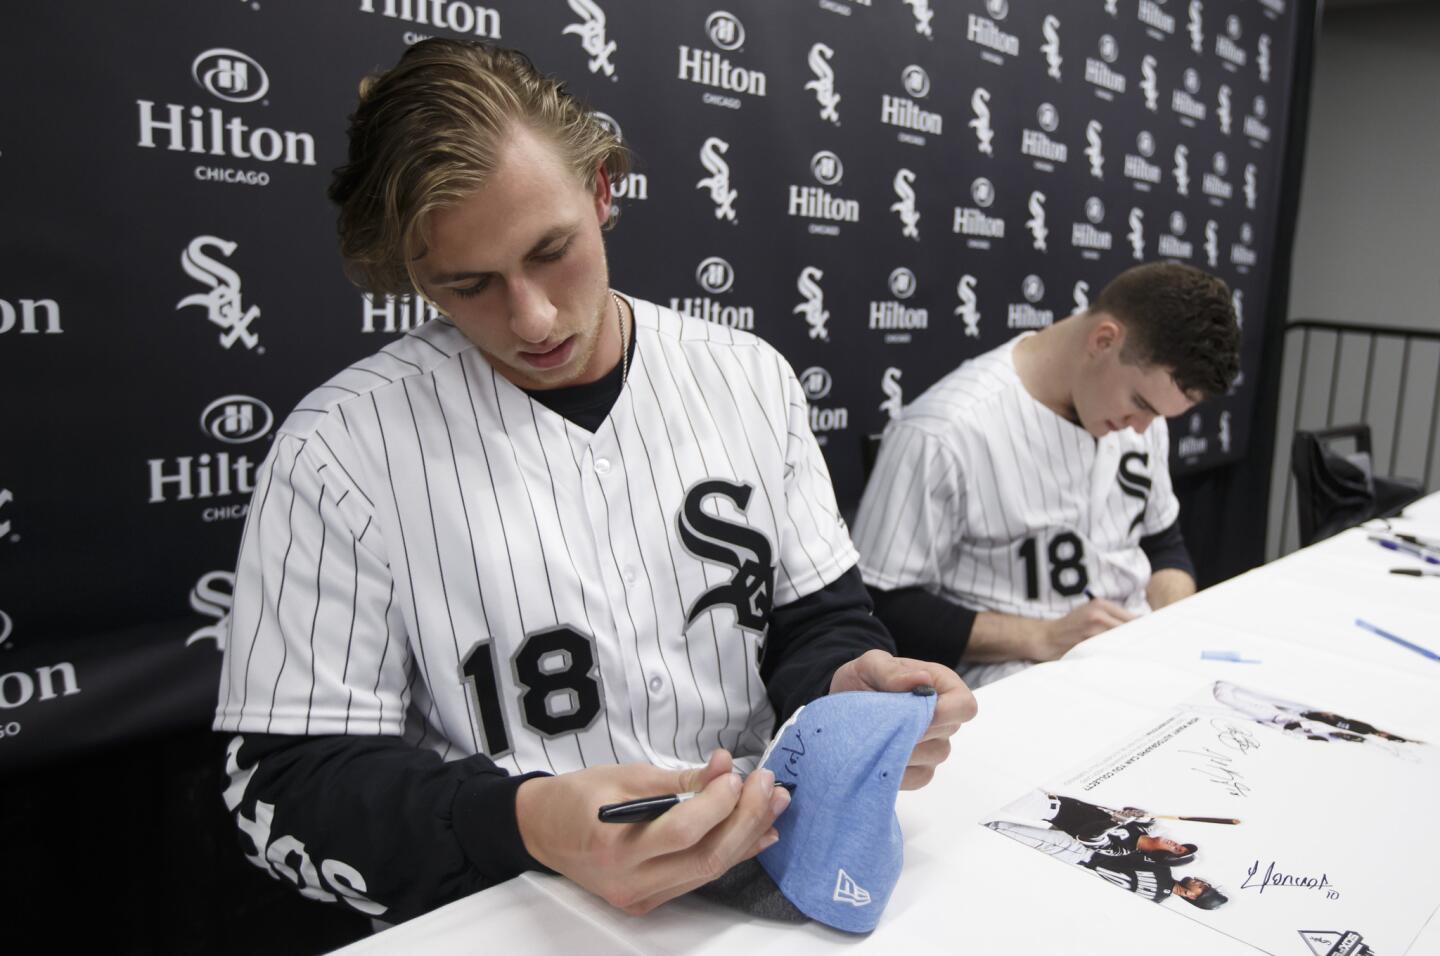 White Sox pitcher Michael Kopech, left, signs autographs for fans with White Sox pitcher Zack Burdi during SoxFest 2018 at the Hilton Chicago on Friday, Jan. 26, 2018.